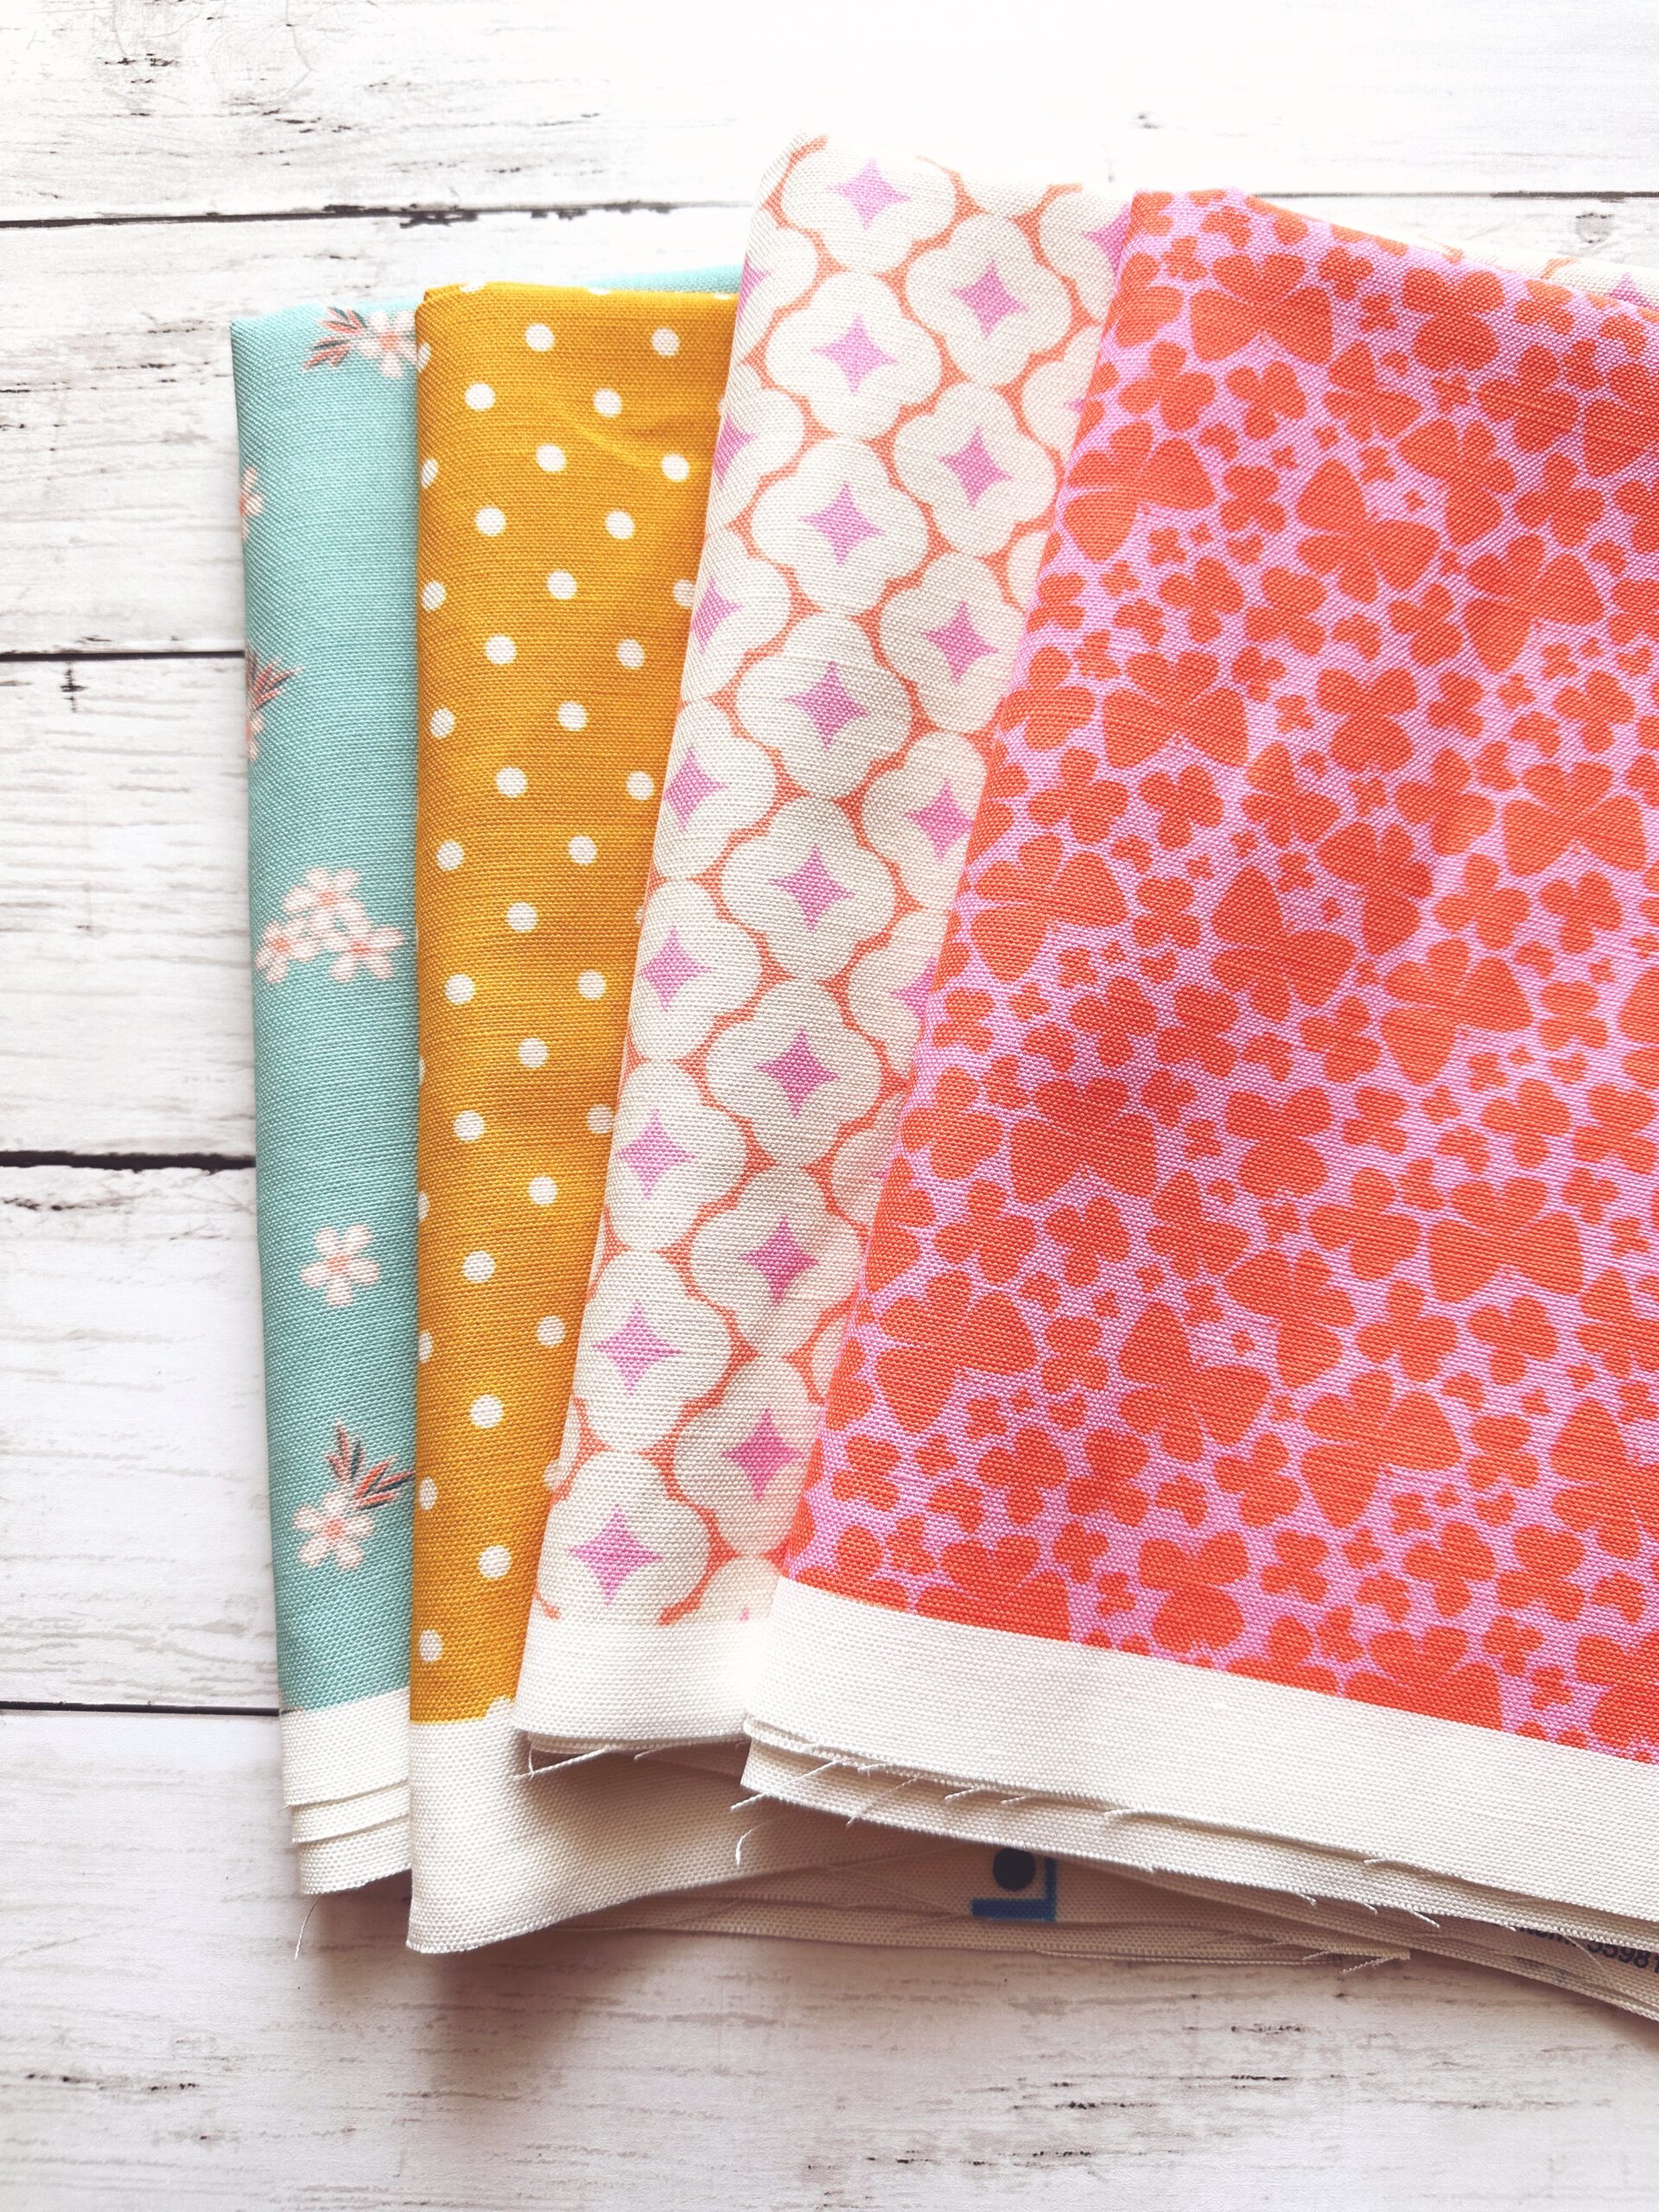 Four fabrics fanned out on a white surface. Bright pink with butterflies. White with peach rounded diamonds. Yellow and white polka dots. And blue with tiny white flowers.